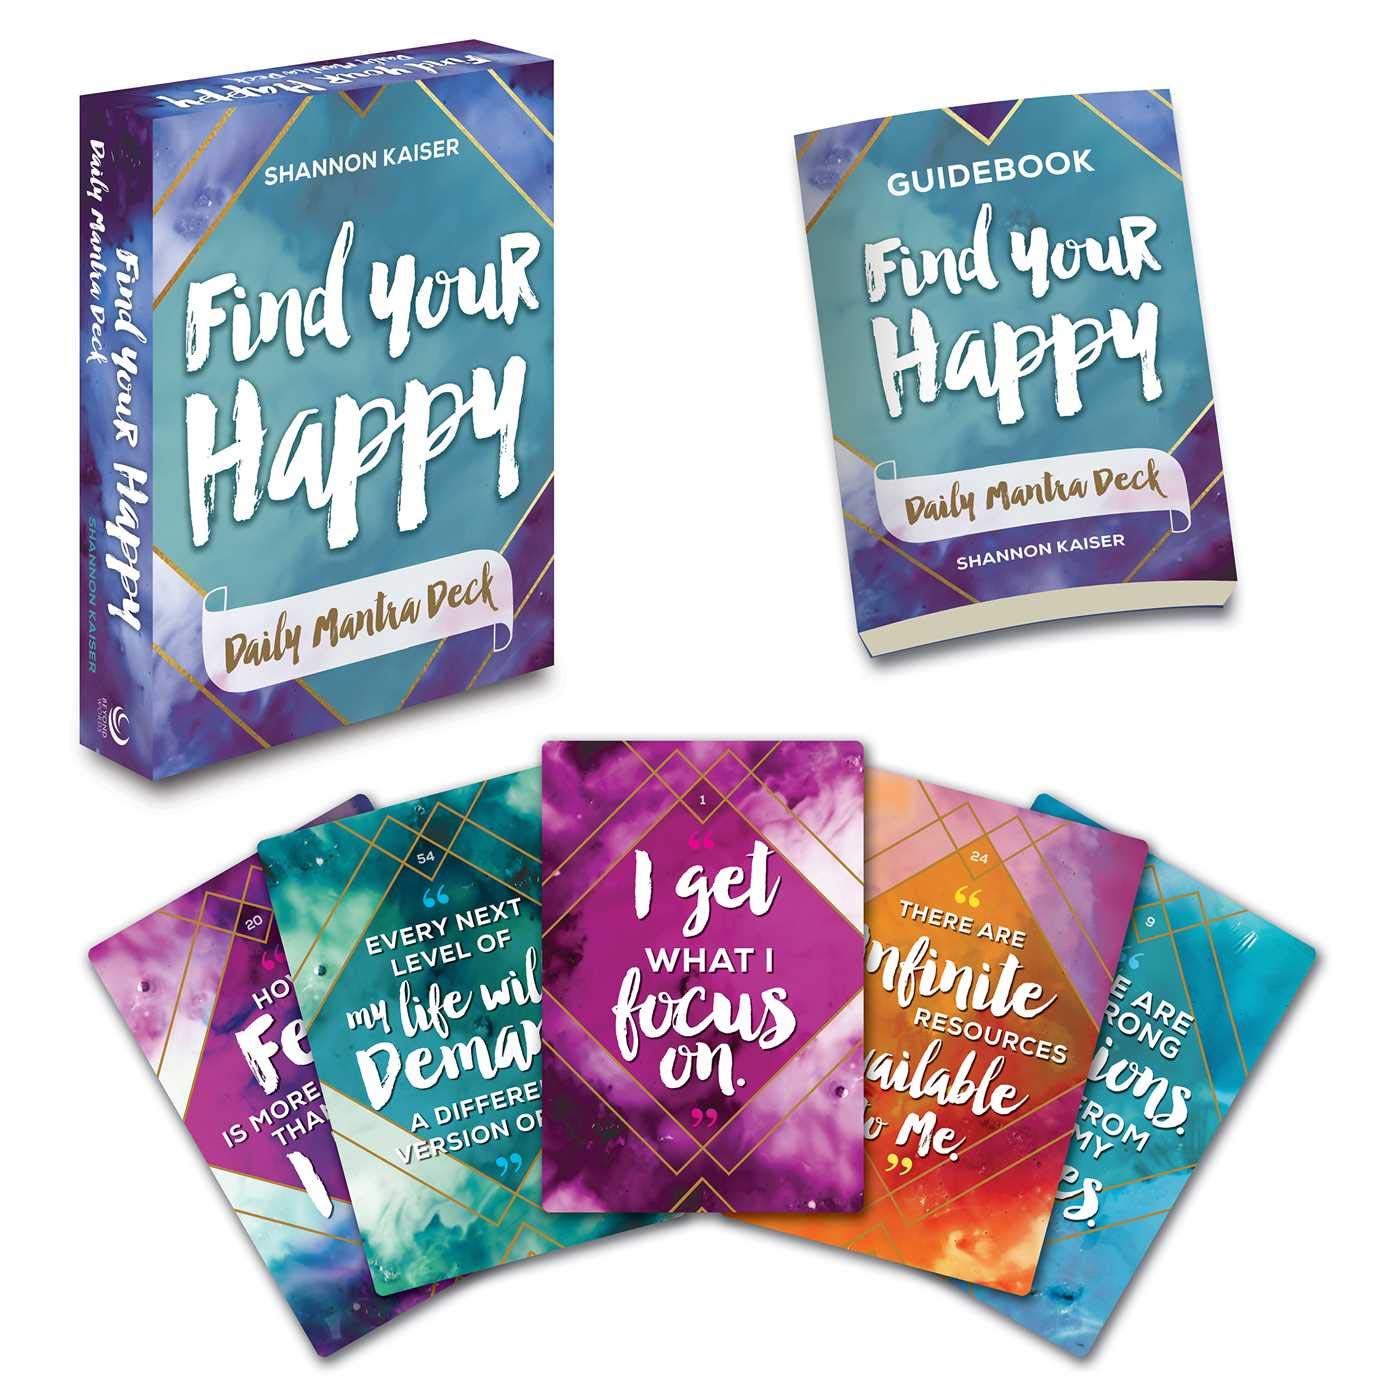 Find Your Happy Daily Mantra Deck Cards